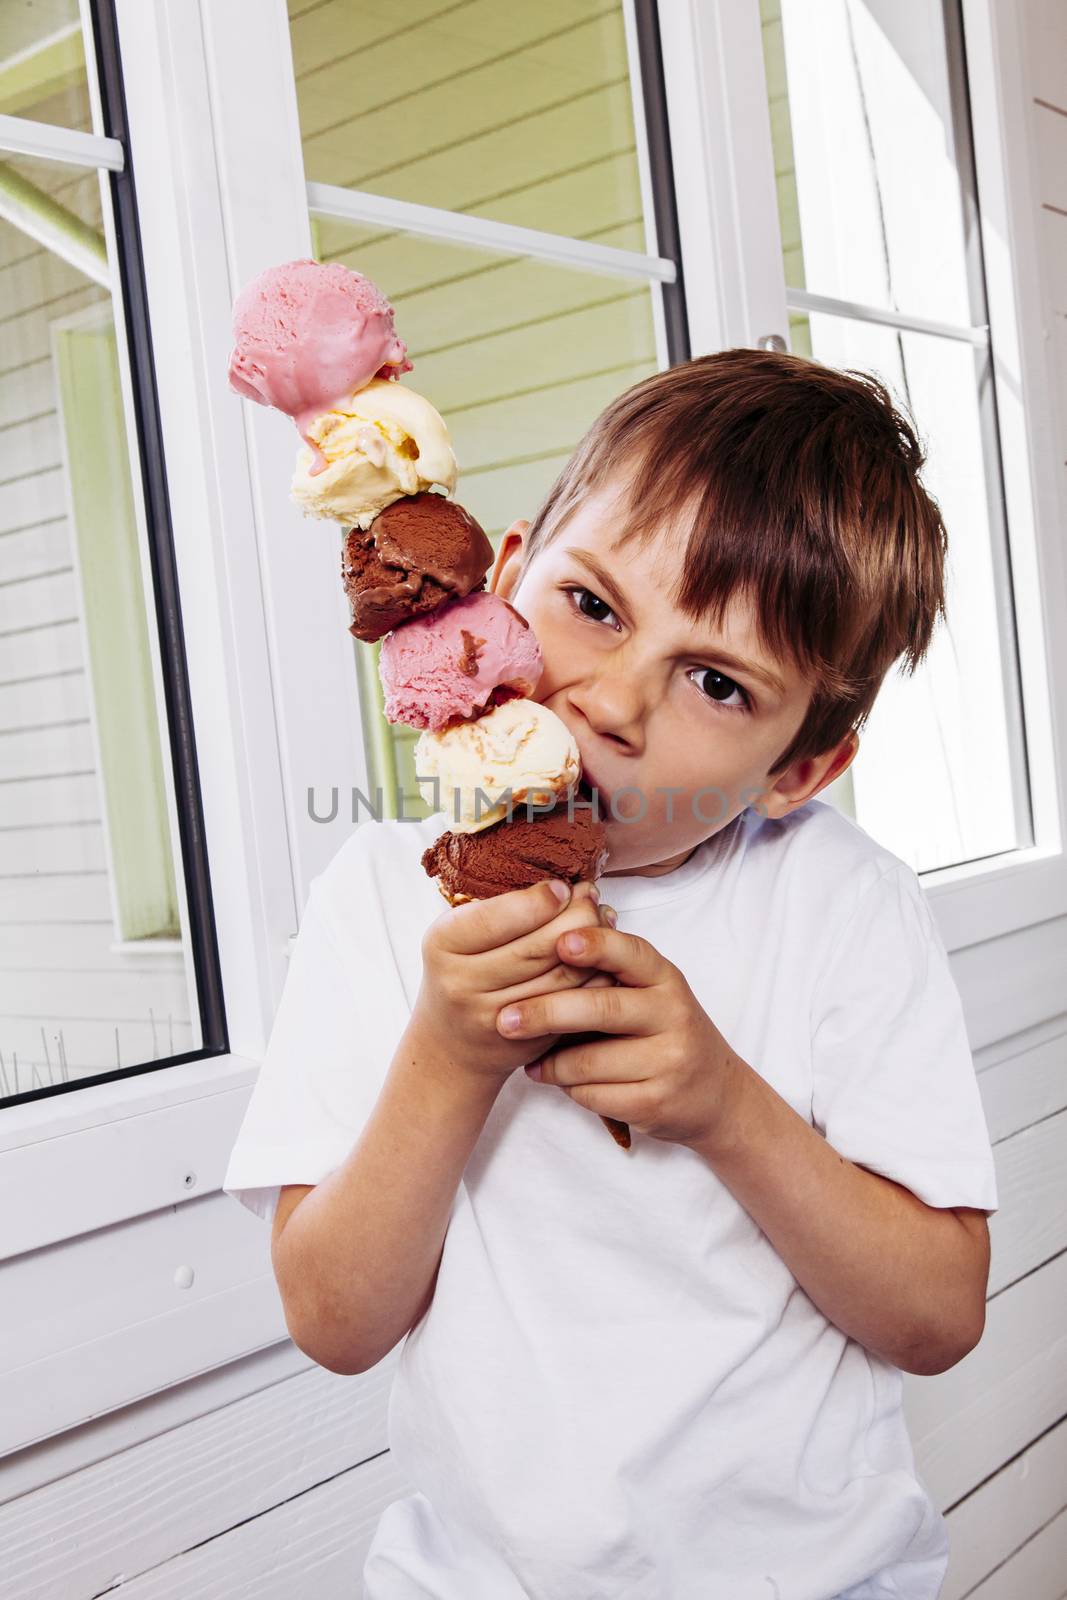 Photo of a 6 year old eating a tall ice cream cone wit six scoops of chocolate, vanilla and strawberry.